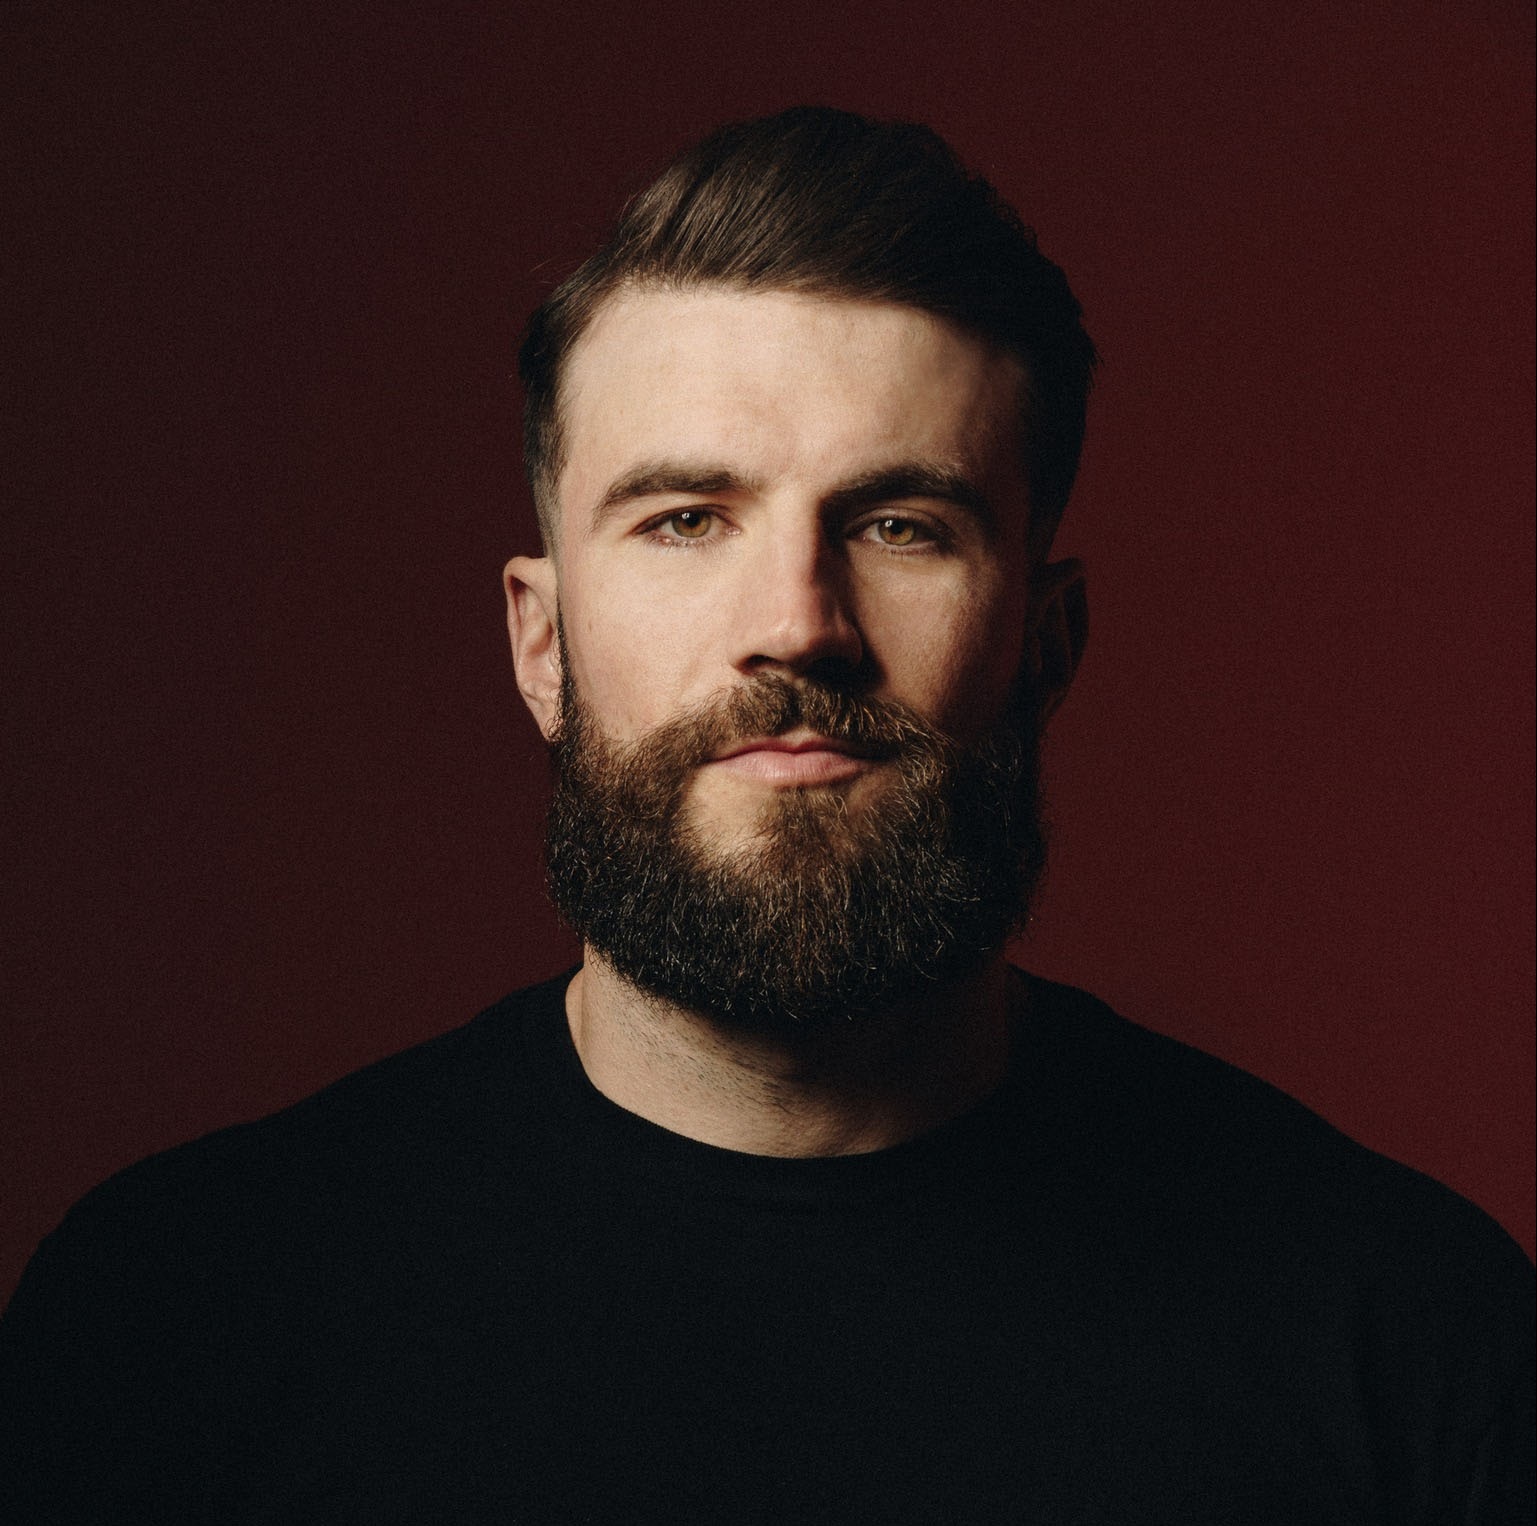 SAM HUNT’S NEW SONG STOOD OUT AMONG THE SONGS HE’S BEEN WRITING.